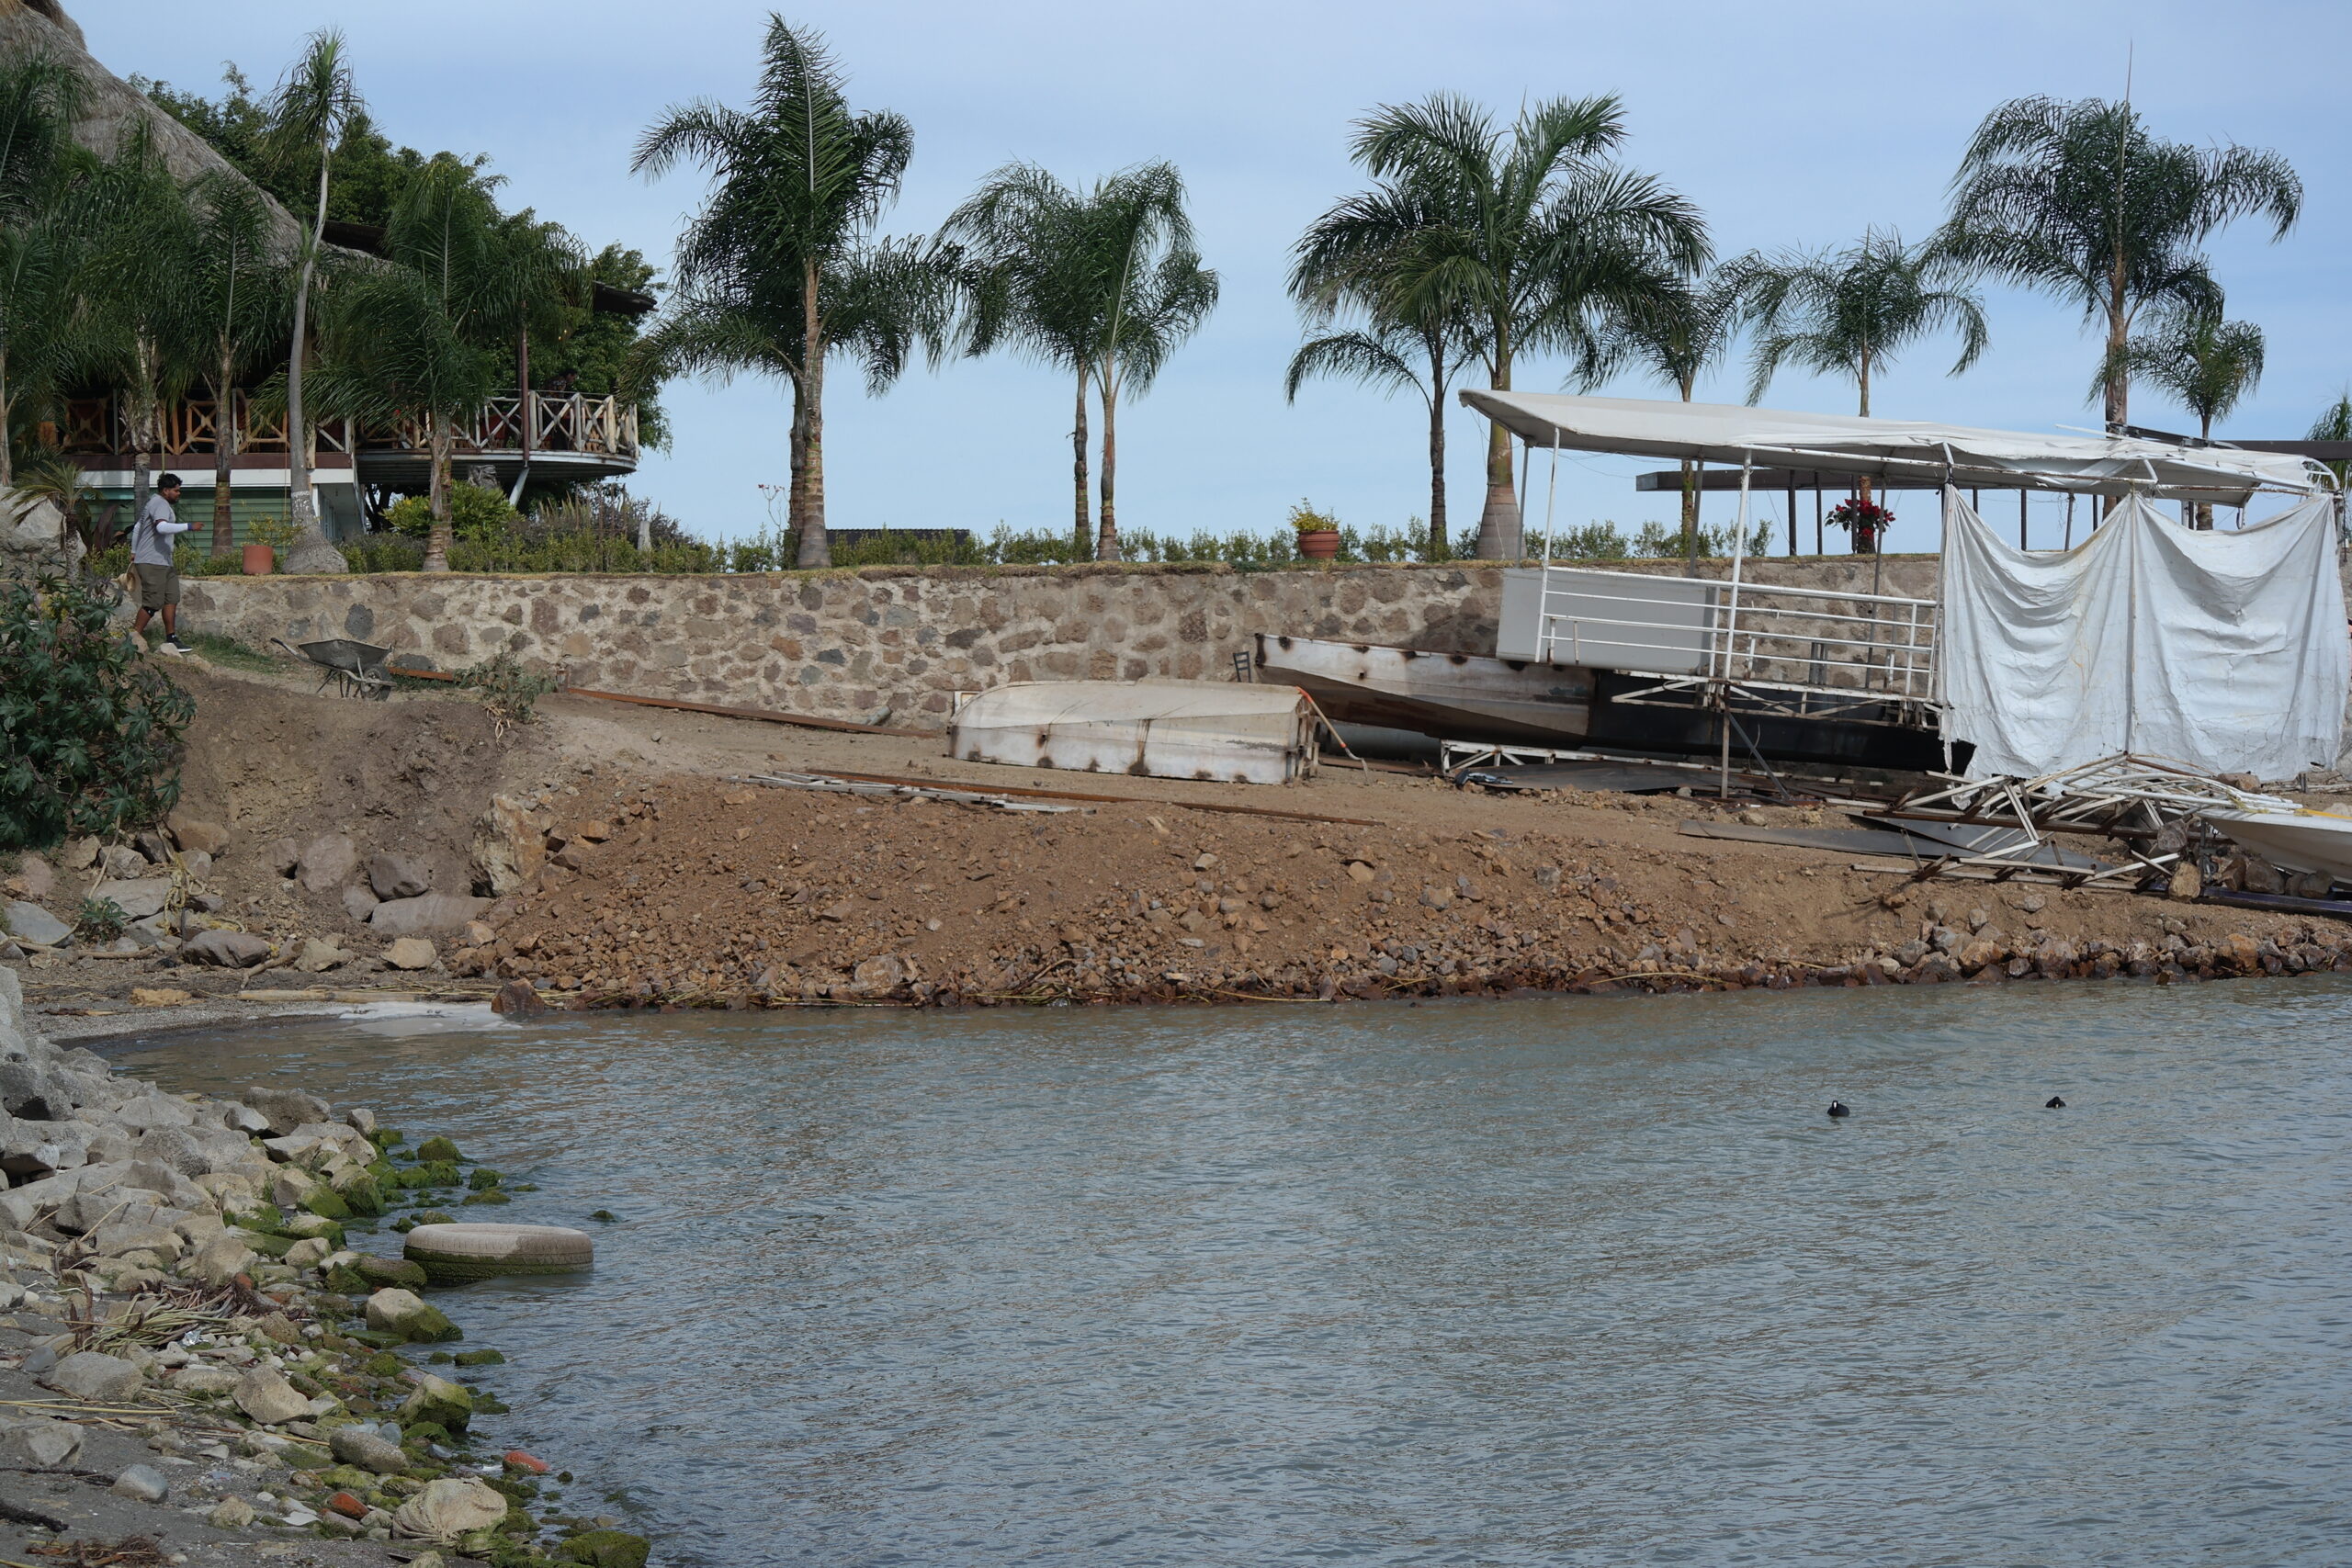 Filling the lake by Jocotepec restaurant for boat dock continues